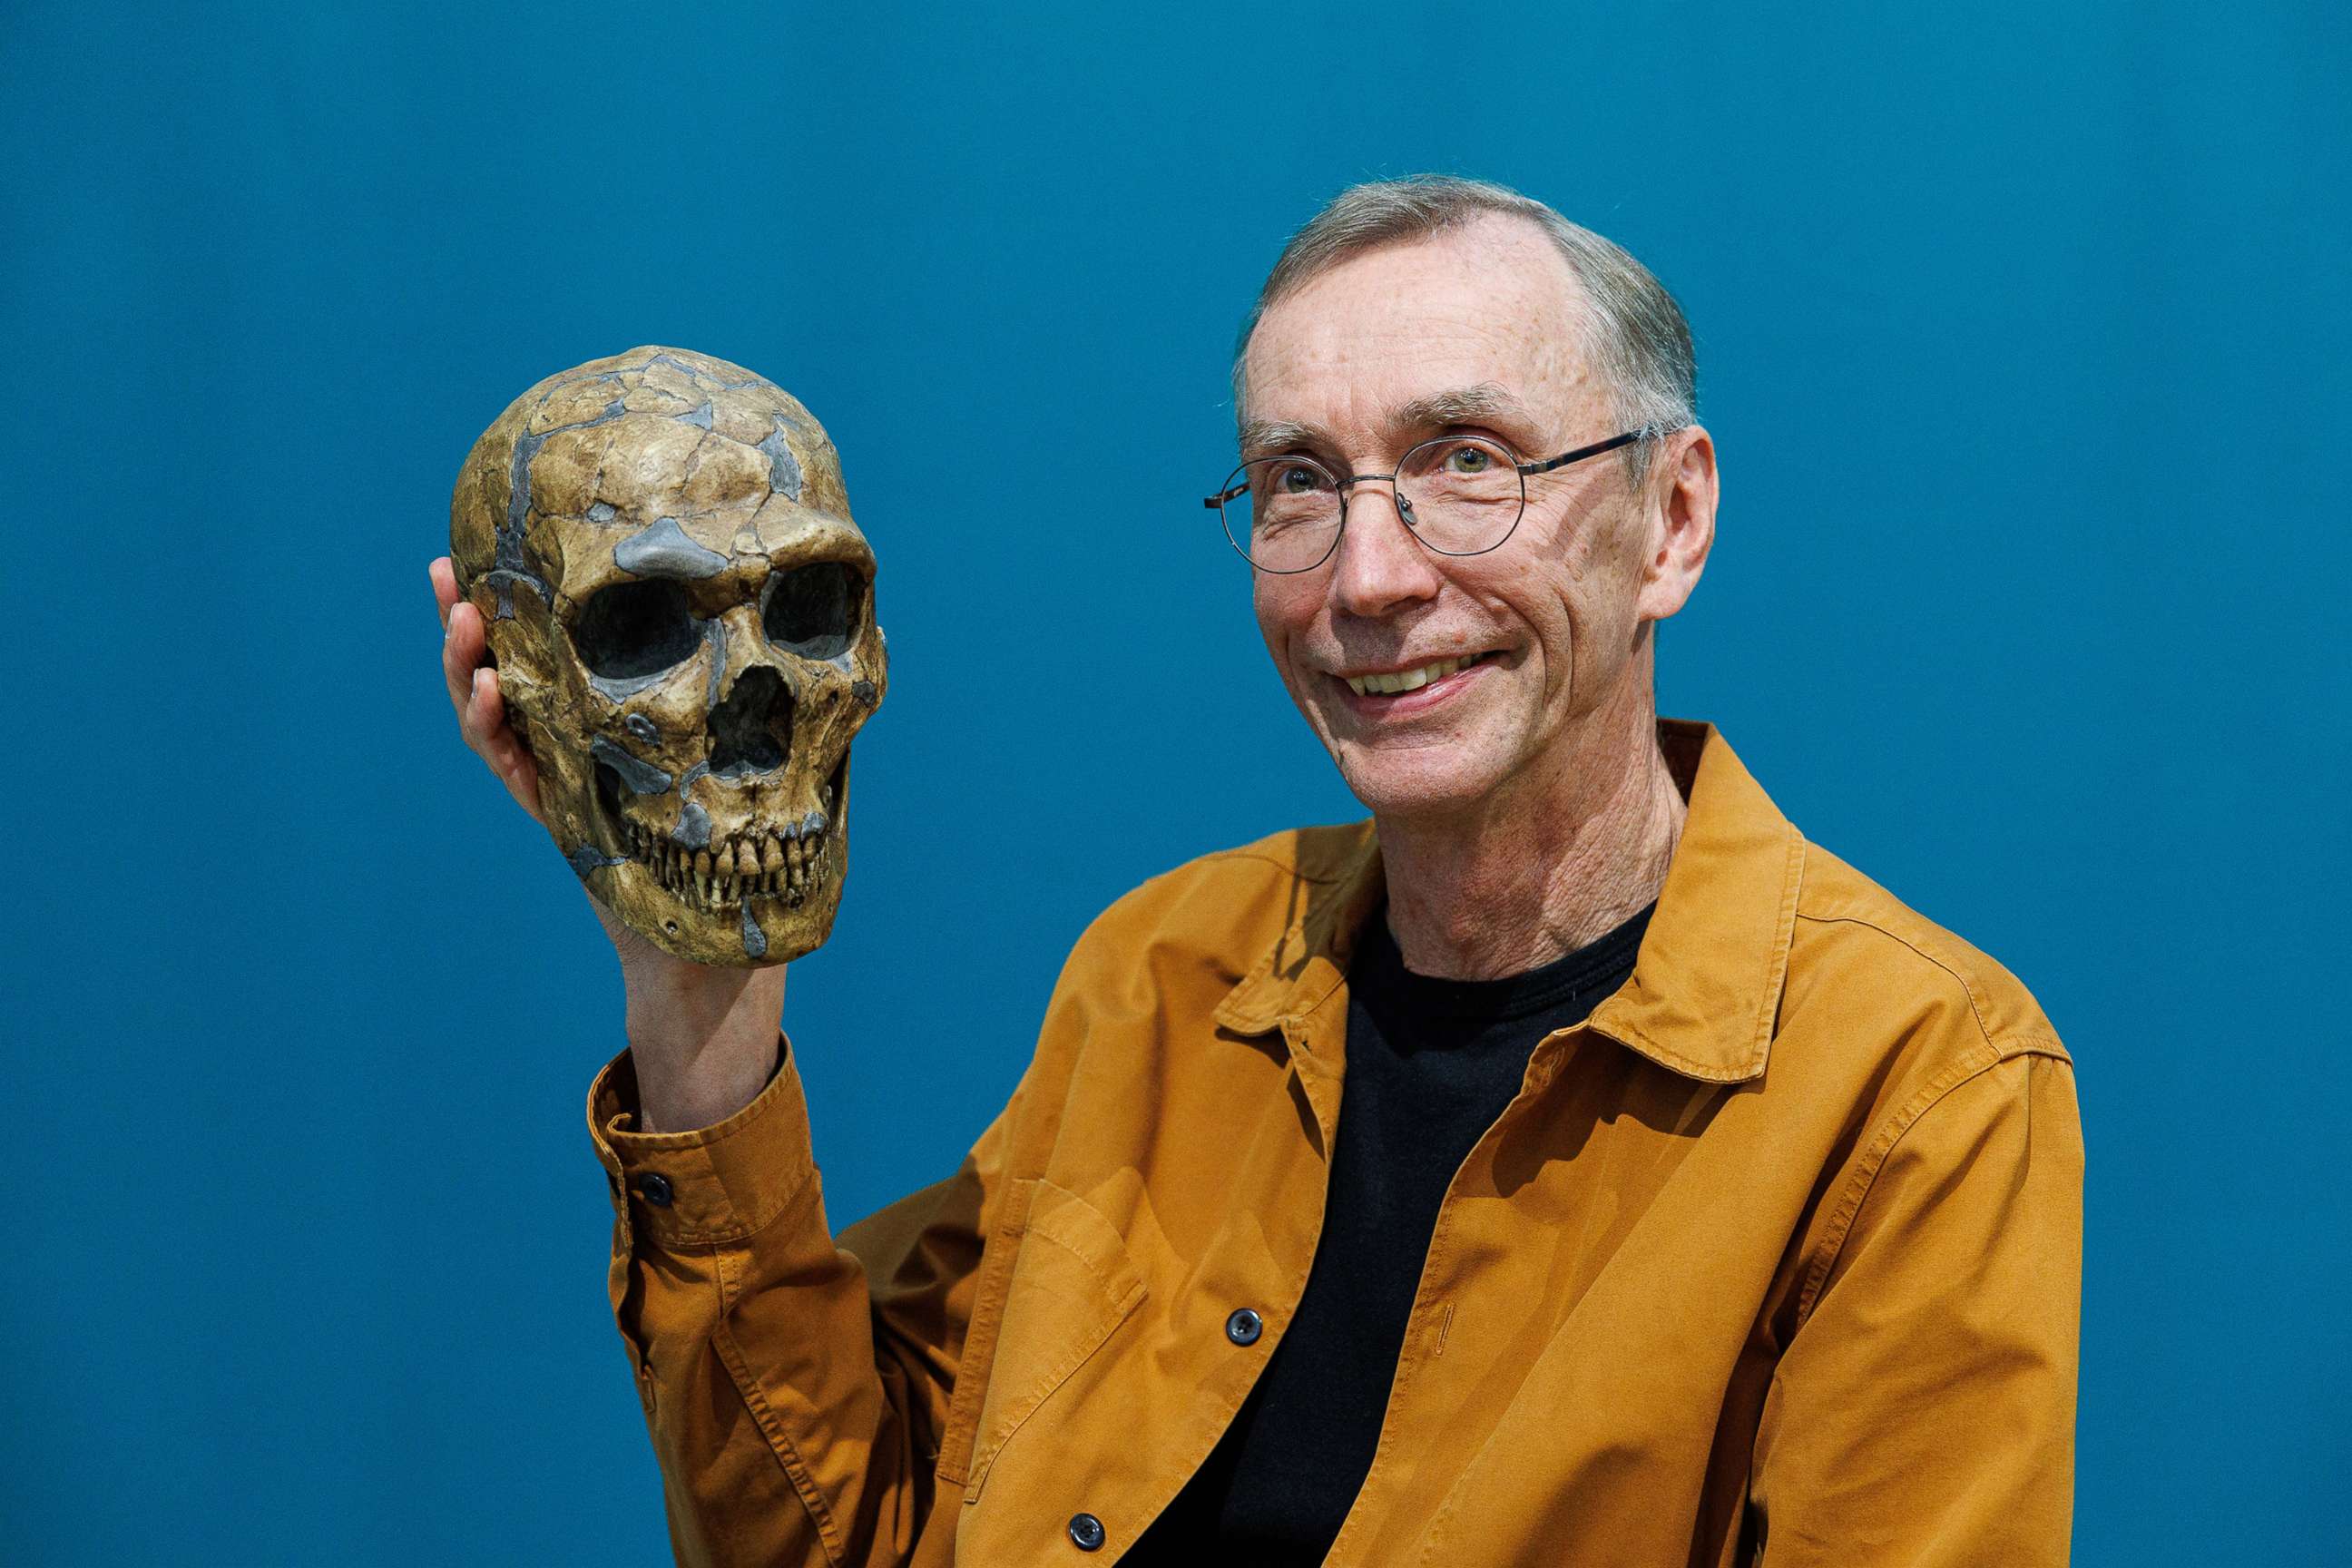 PHOTO: Svante Paabo, holds a model of a Neanderthal skeleton at the end of a press conference, after he won the Nobel Prize in Physiology or Medicine on Oct. 3, 2022 in Leipzig, Germany. 